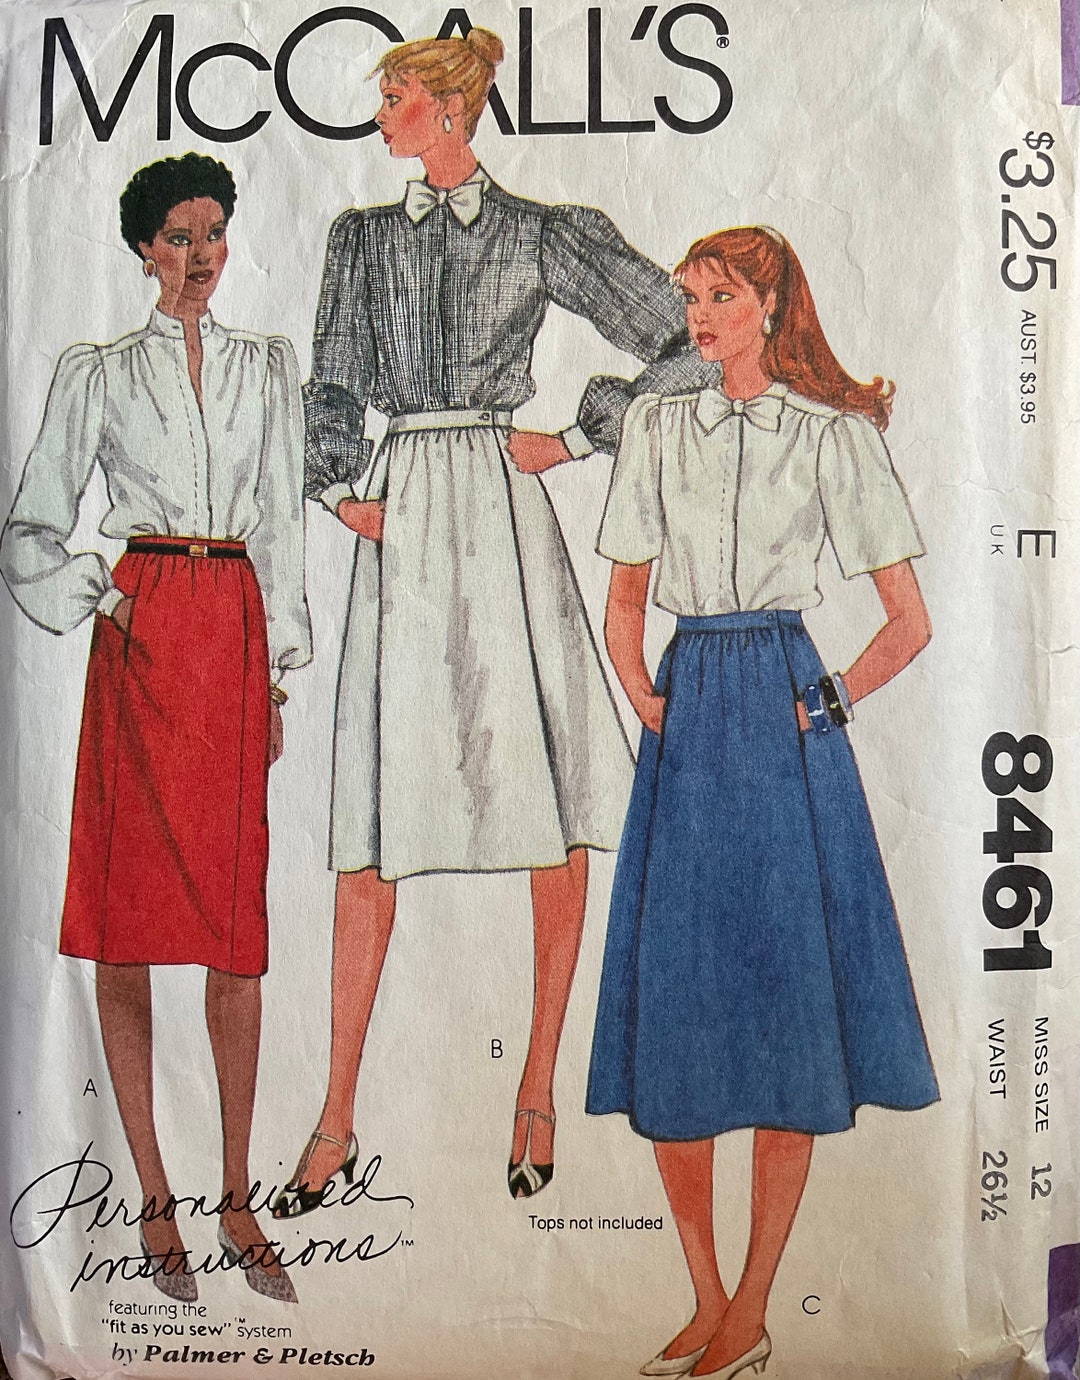 Mccall's 8461 Sewing Pattern vintage CUT - Etsy